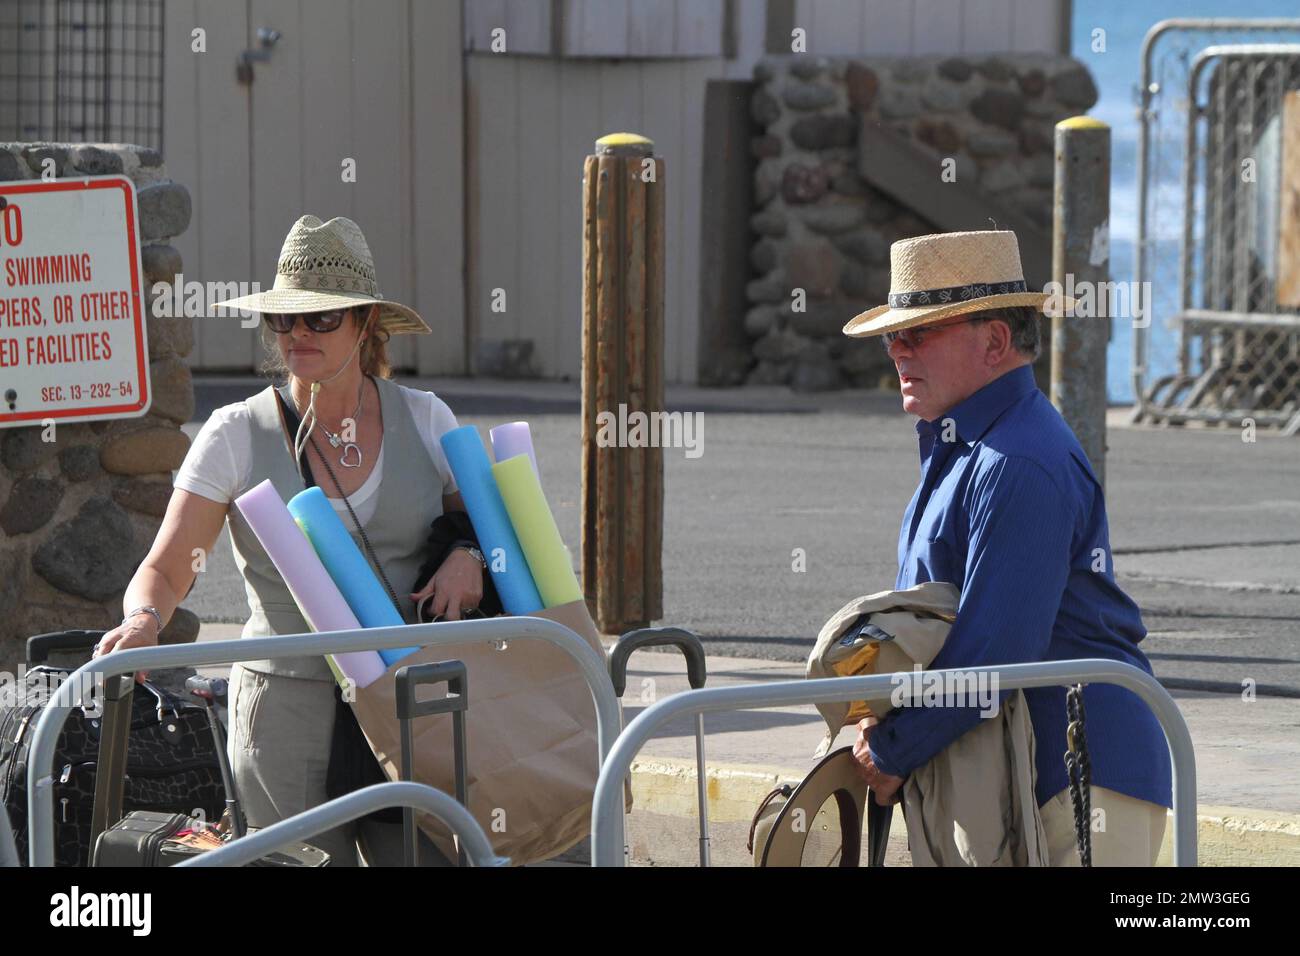 EXCLUSIVE!! Actor William Shatner and wife Elizabeth Martin are seen boarding a boat whilst on holiday in Hawaii.   The star worldly recognized as Captain Kirk of the "Star Trek" series, tried to stay incognito under a Panama hat whilst boarding the boat with luggage and a bag full of water noodles.  Shatner, 80, is reportedly headed to Broadway again.  His one man show, "Shatner's World: We Just Live In It" will debut in February 2012 for a brief run at the Music Box Theatre on Broadway. The show which Shatner wrote himself, will kick off a 15-week national tour and is based on the years of f Stock Photo